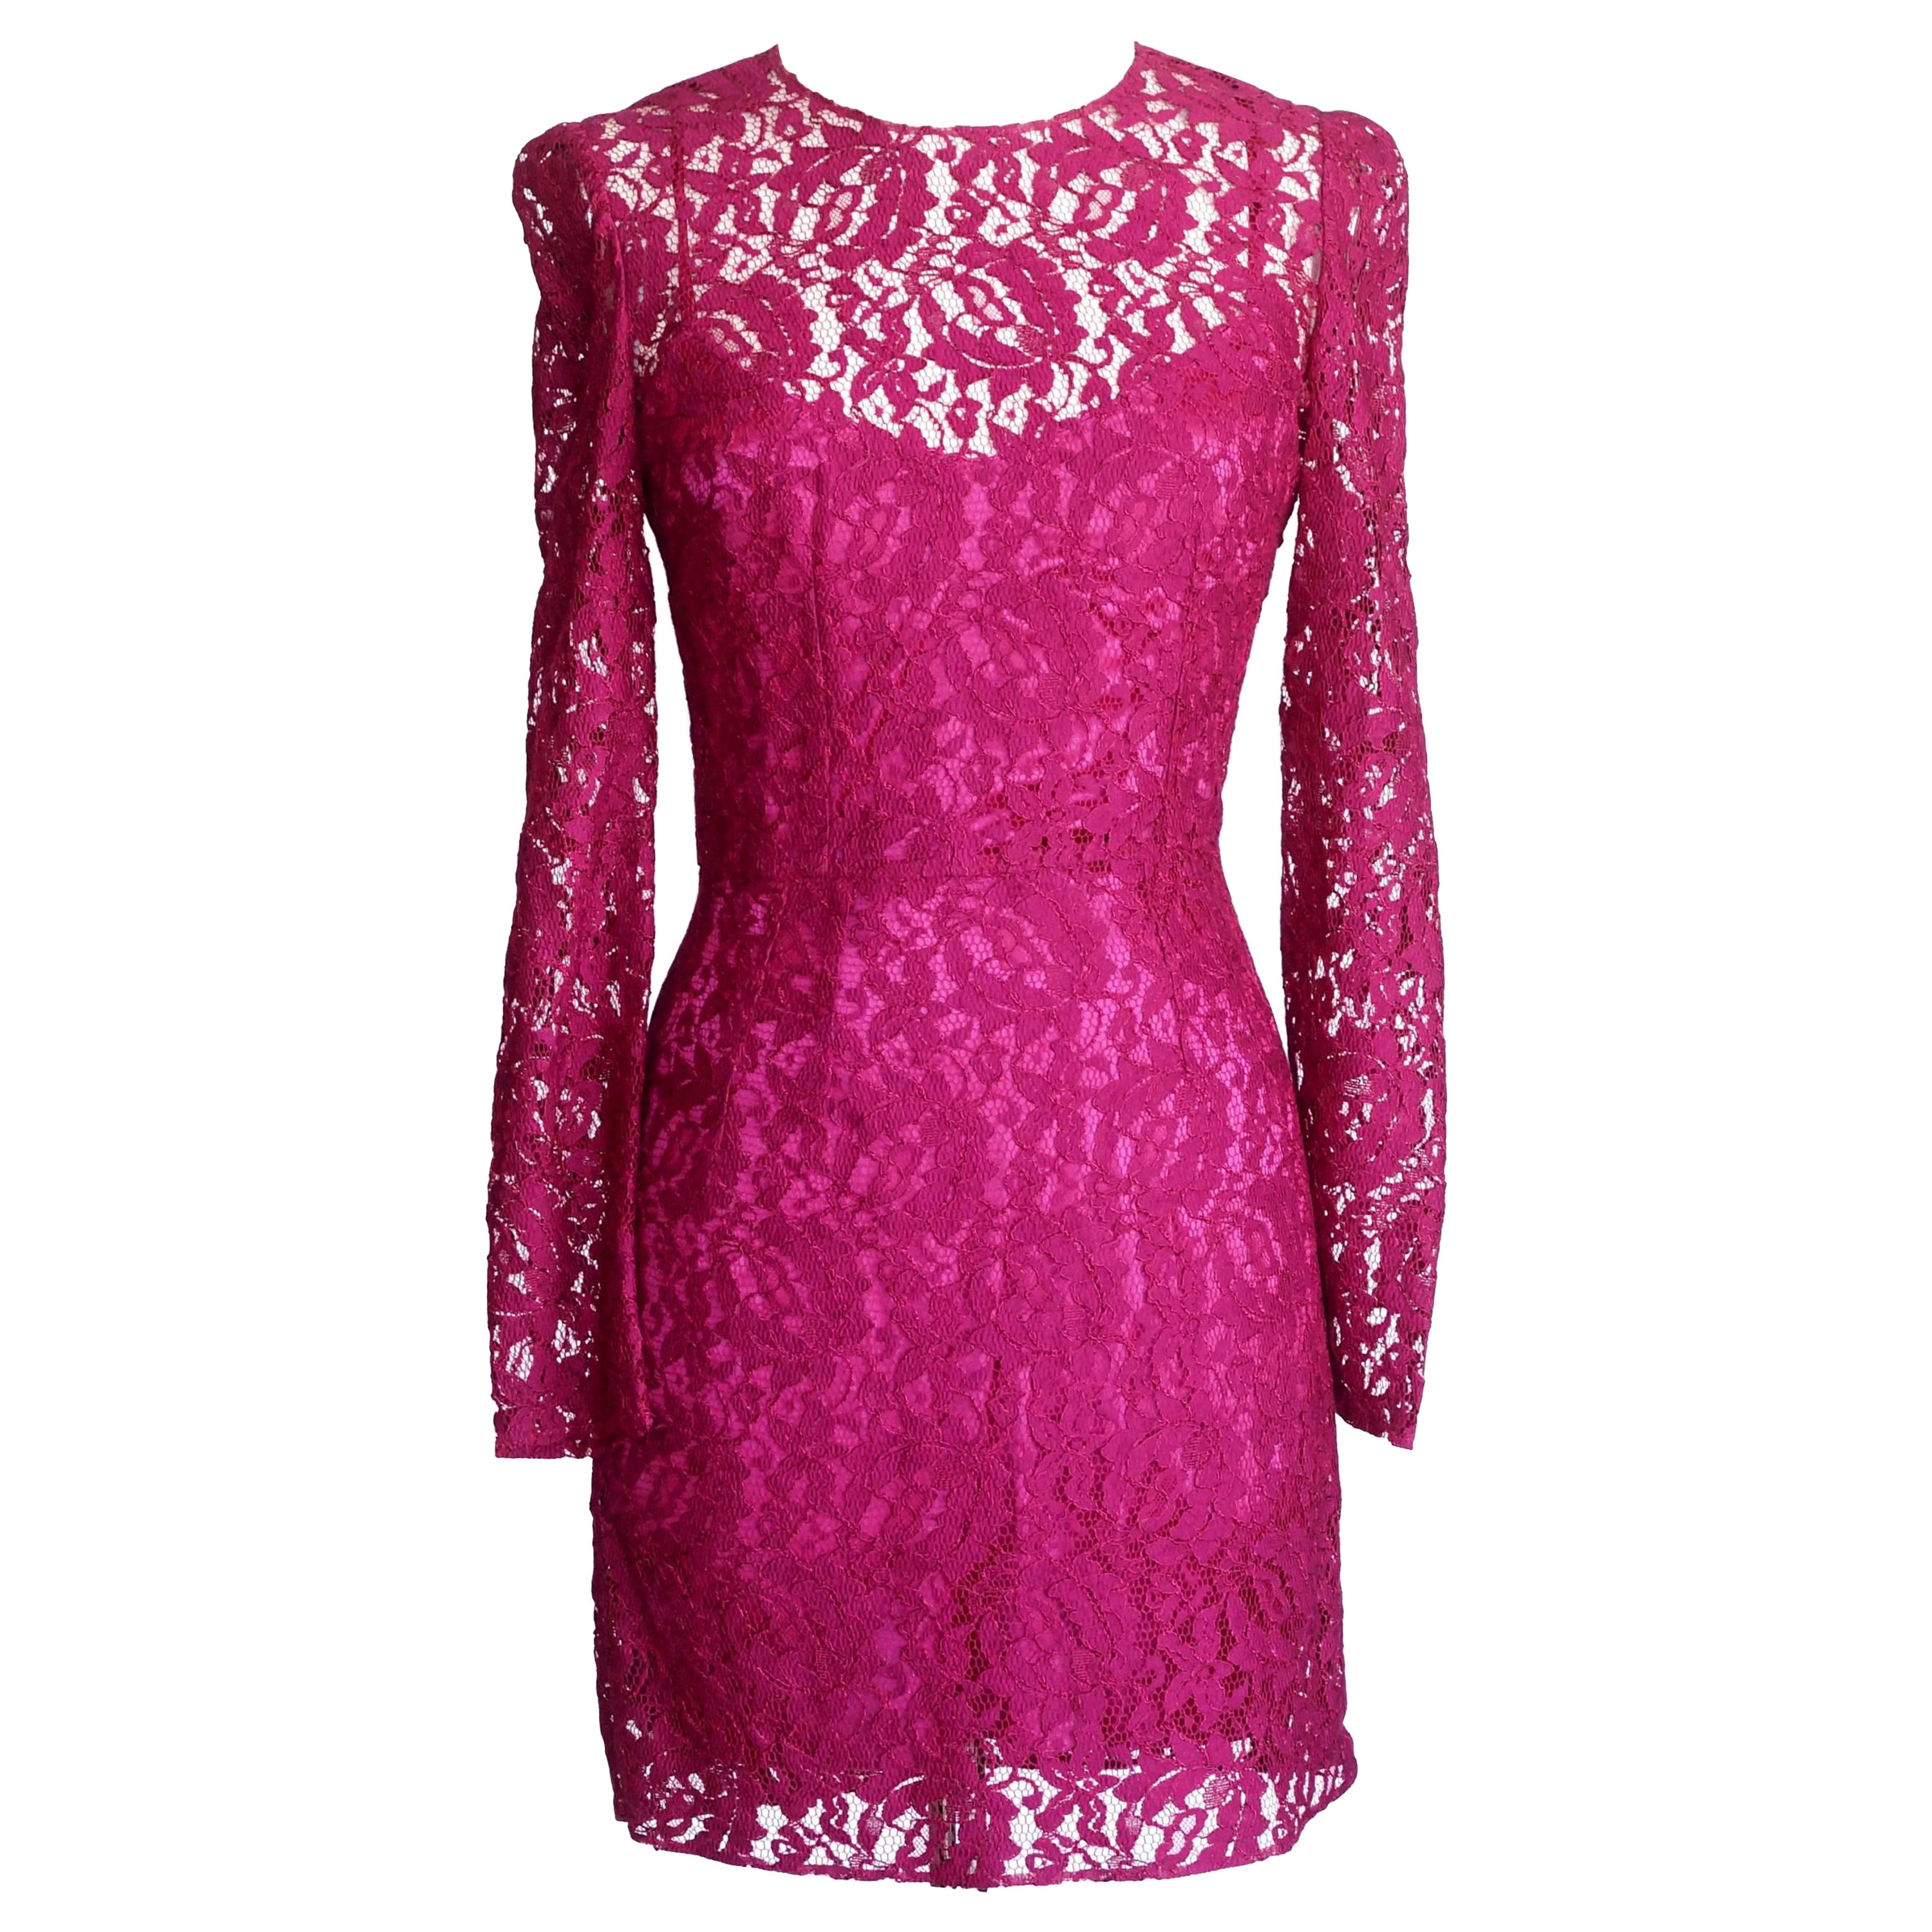 Dolce&Gabbana Dress Hot Magenta Pink Lace  42 / 6  nwt For Sale